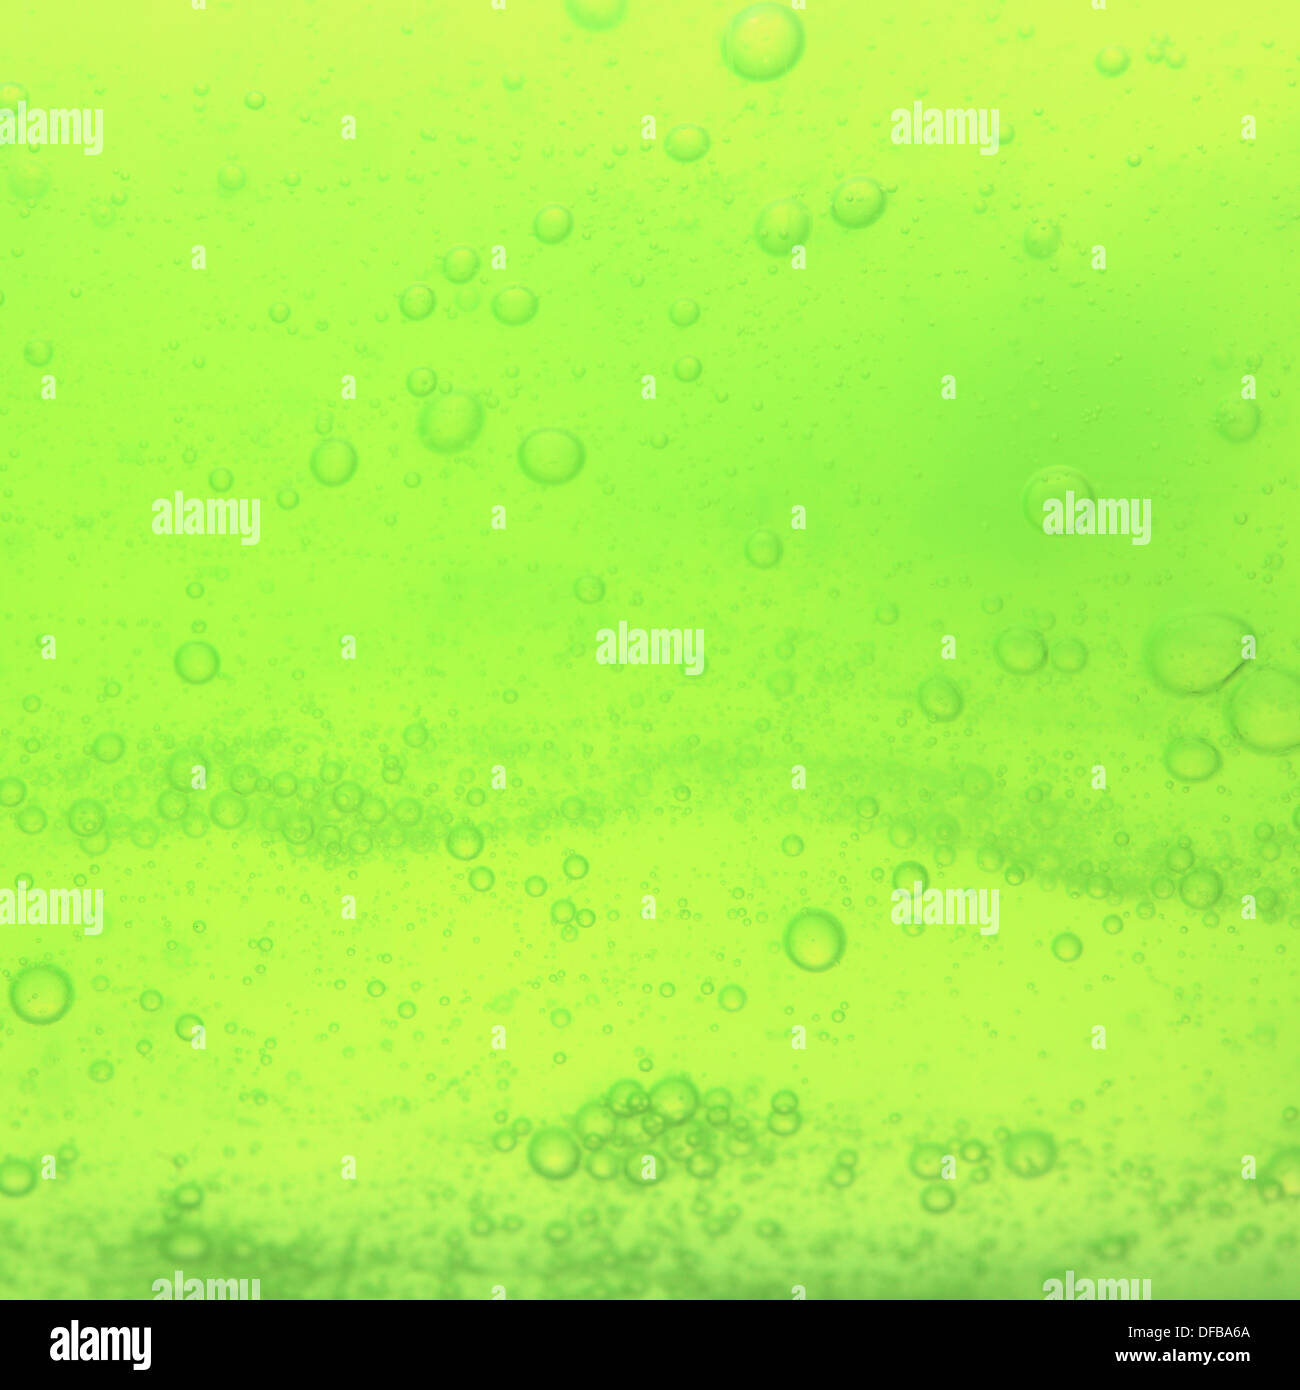 Green abstract blurred liquid background with soap bubbles. Square ...